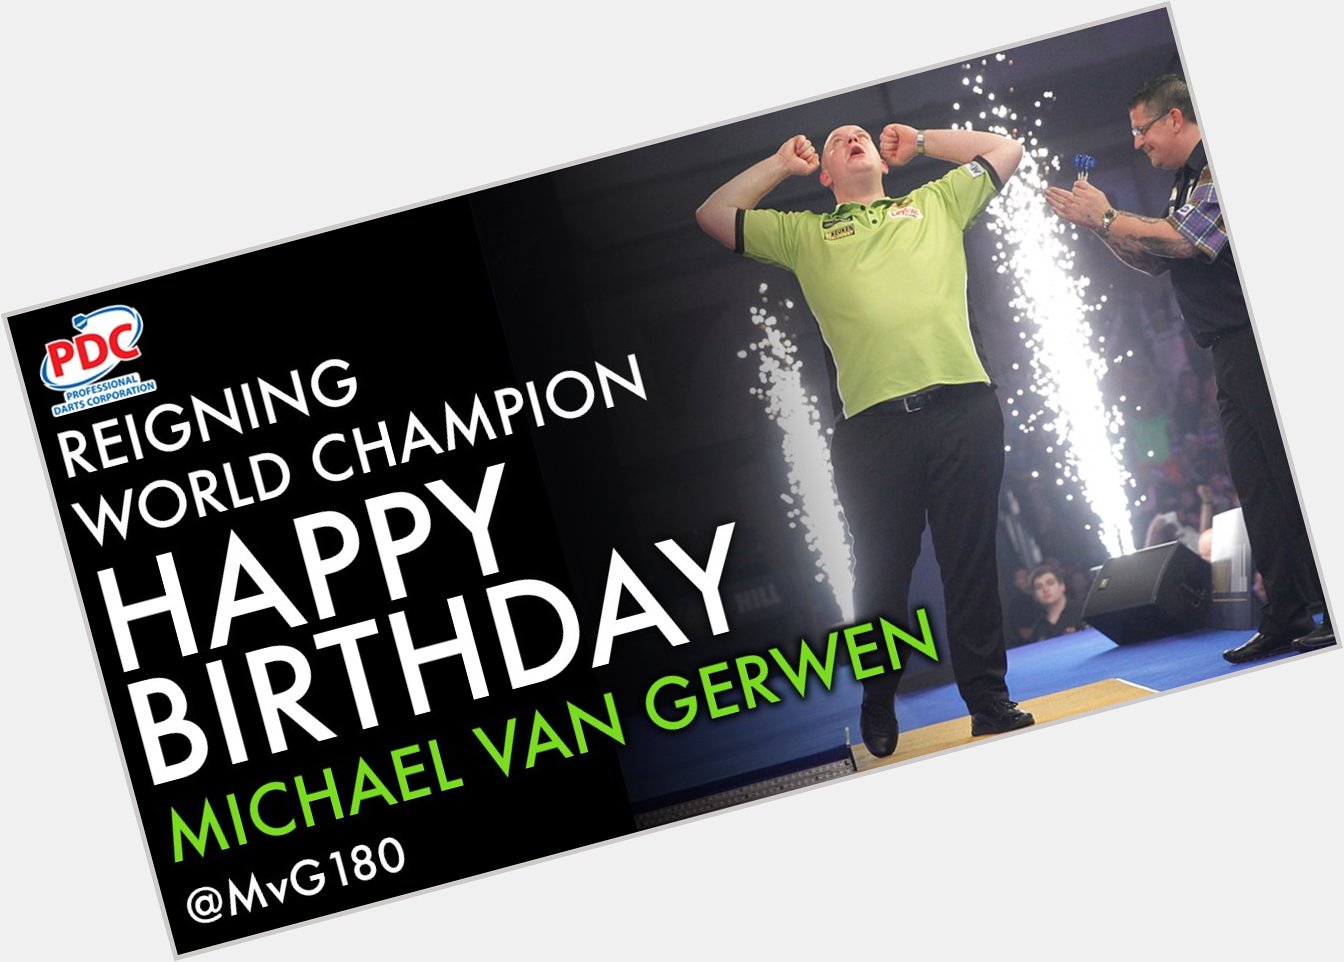 HAPPY BIRTHDAY to the reigning World Champion Michael van Gerwen, who turns 28 today!   